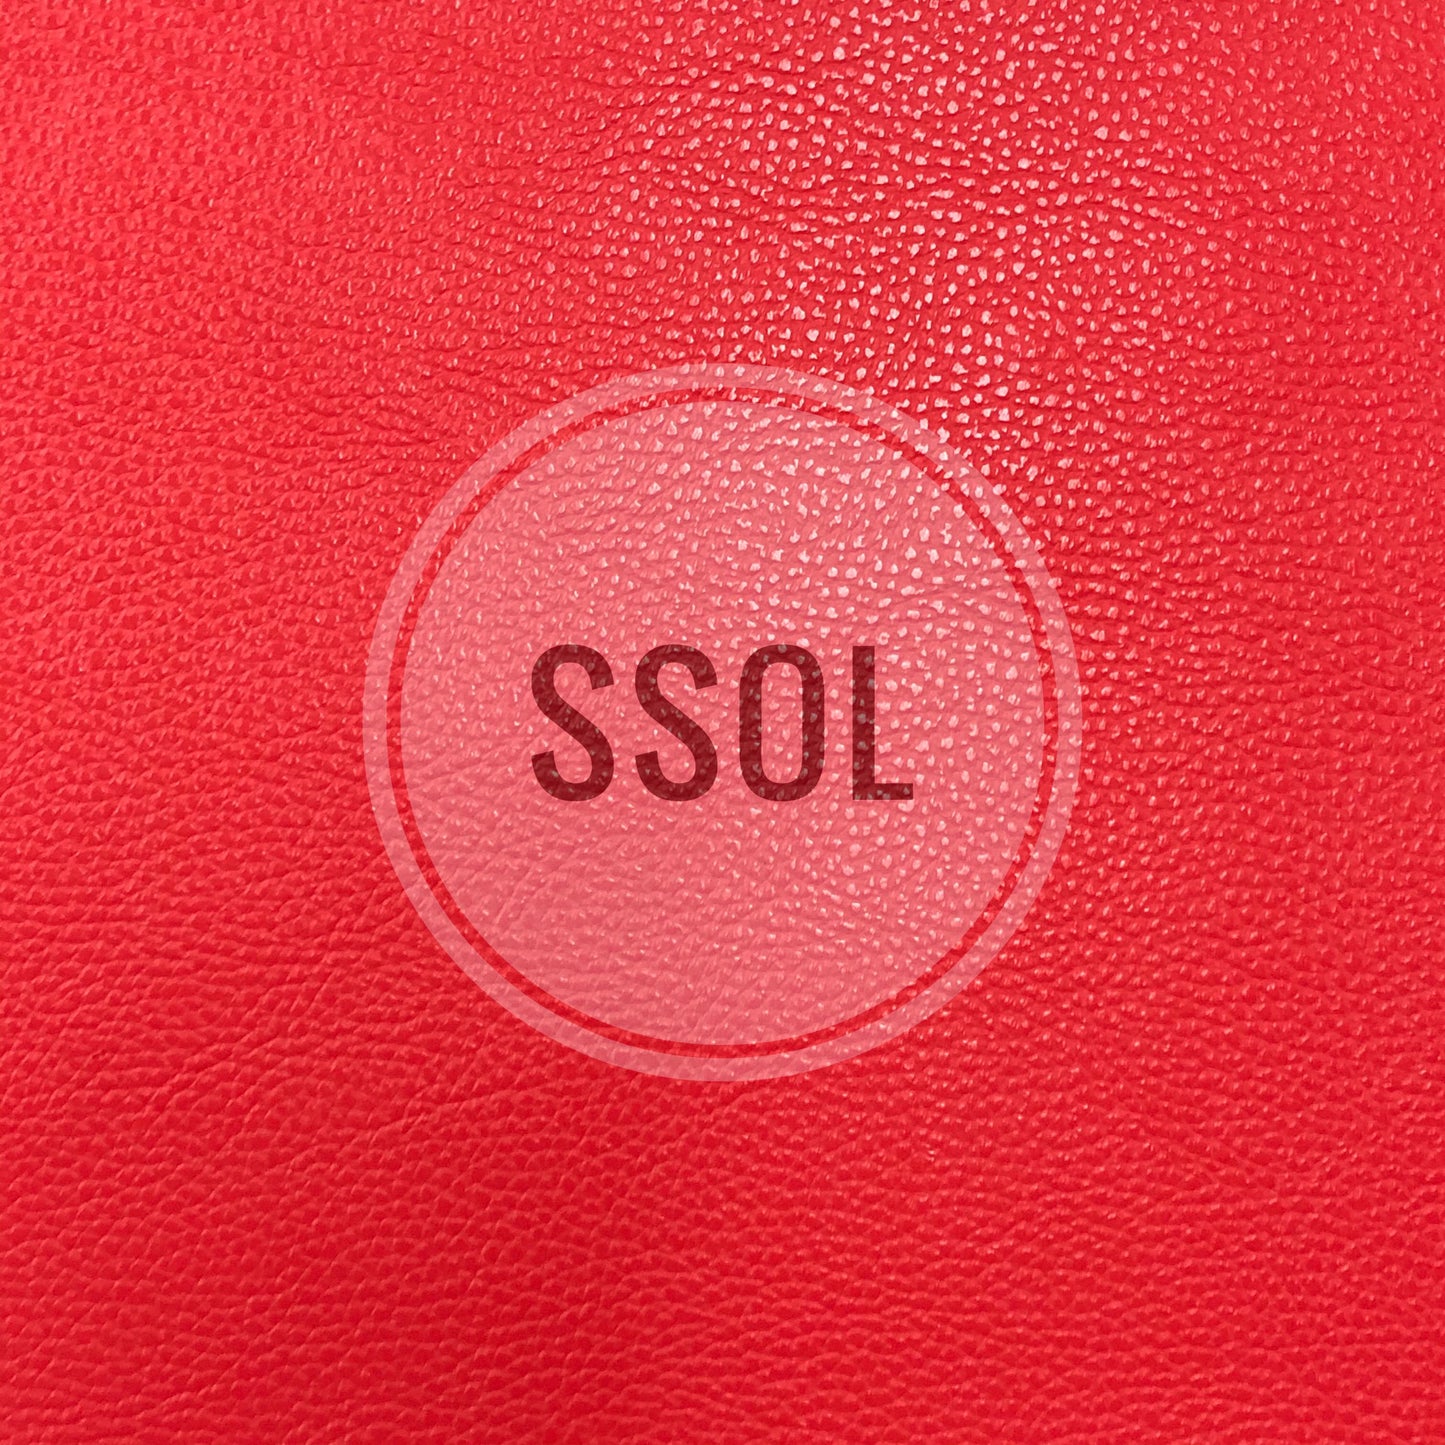 Vinyl/PU Leather - Plain Solids Textured 03 (Chilli Red)